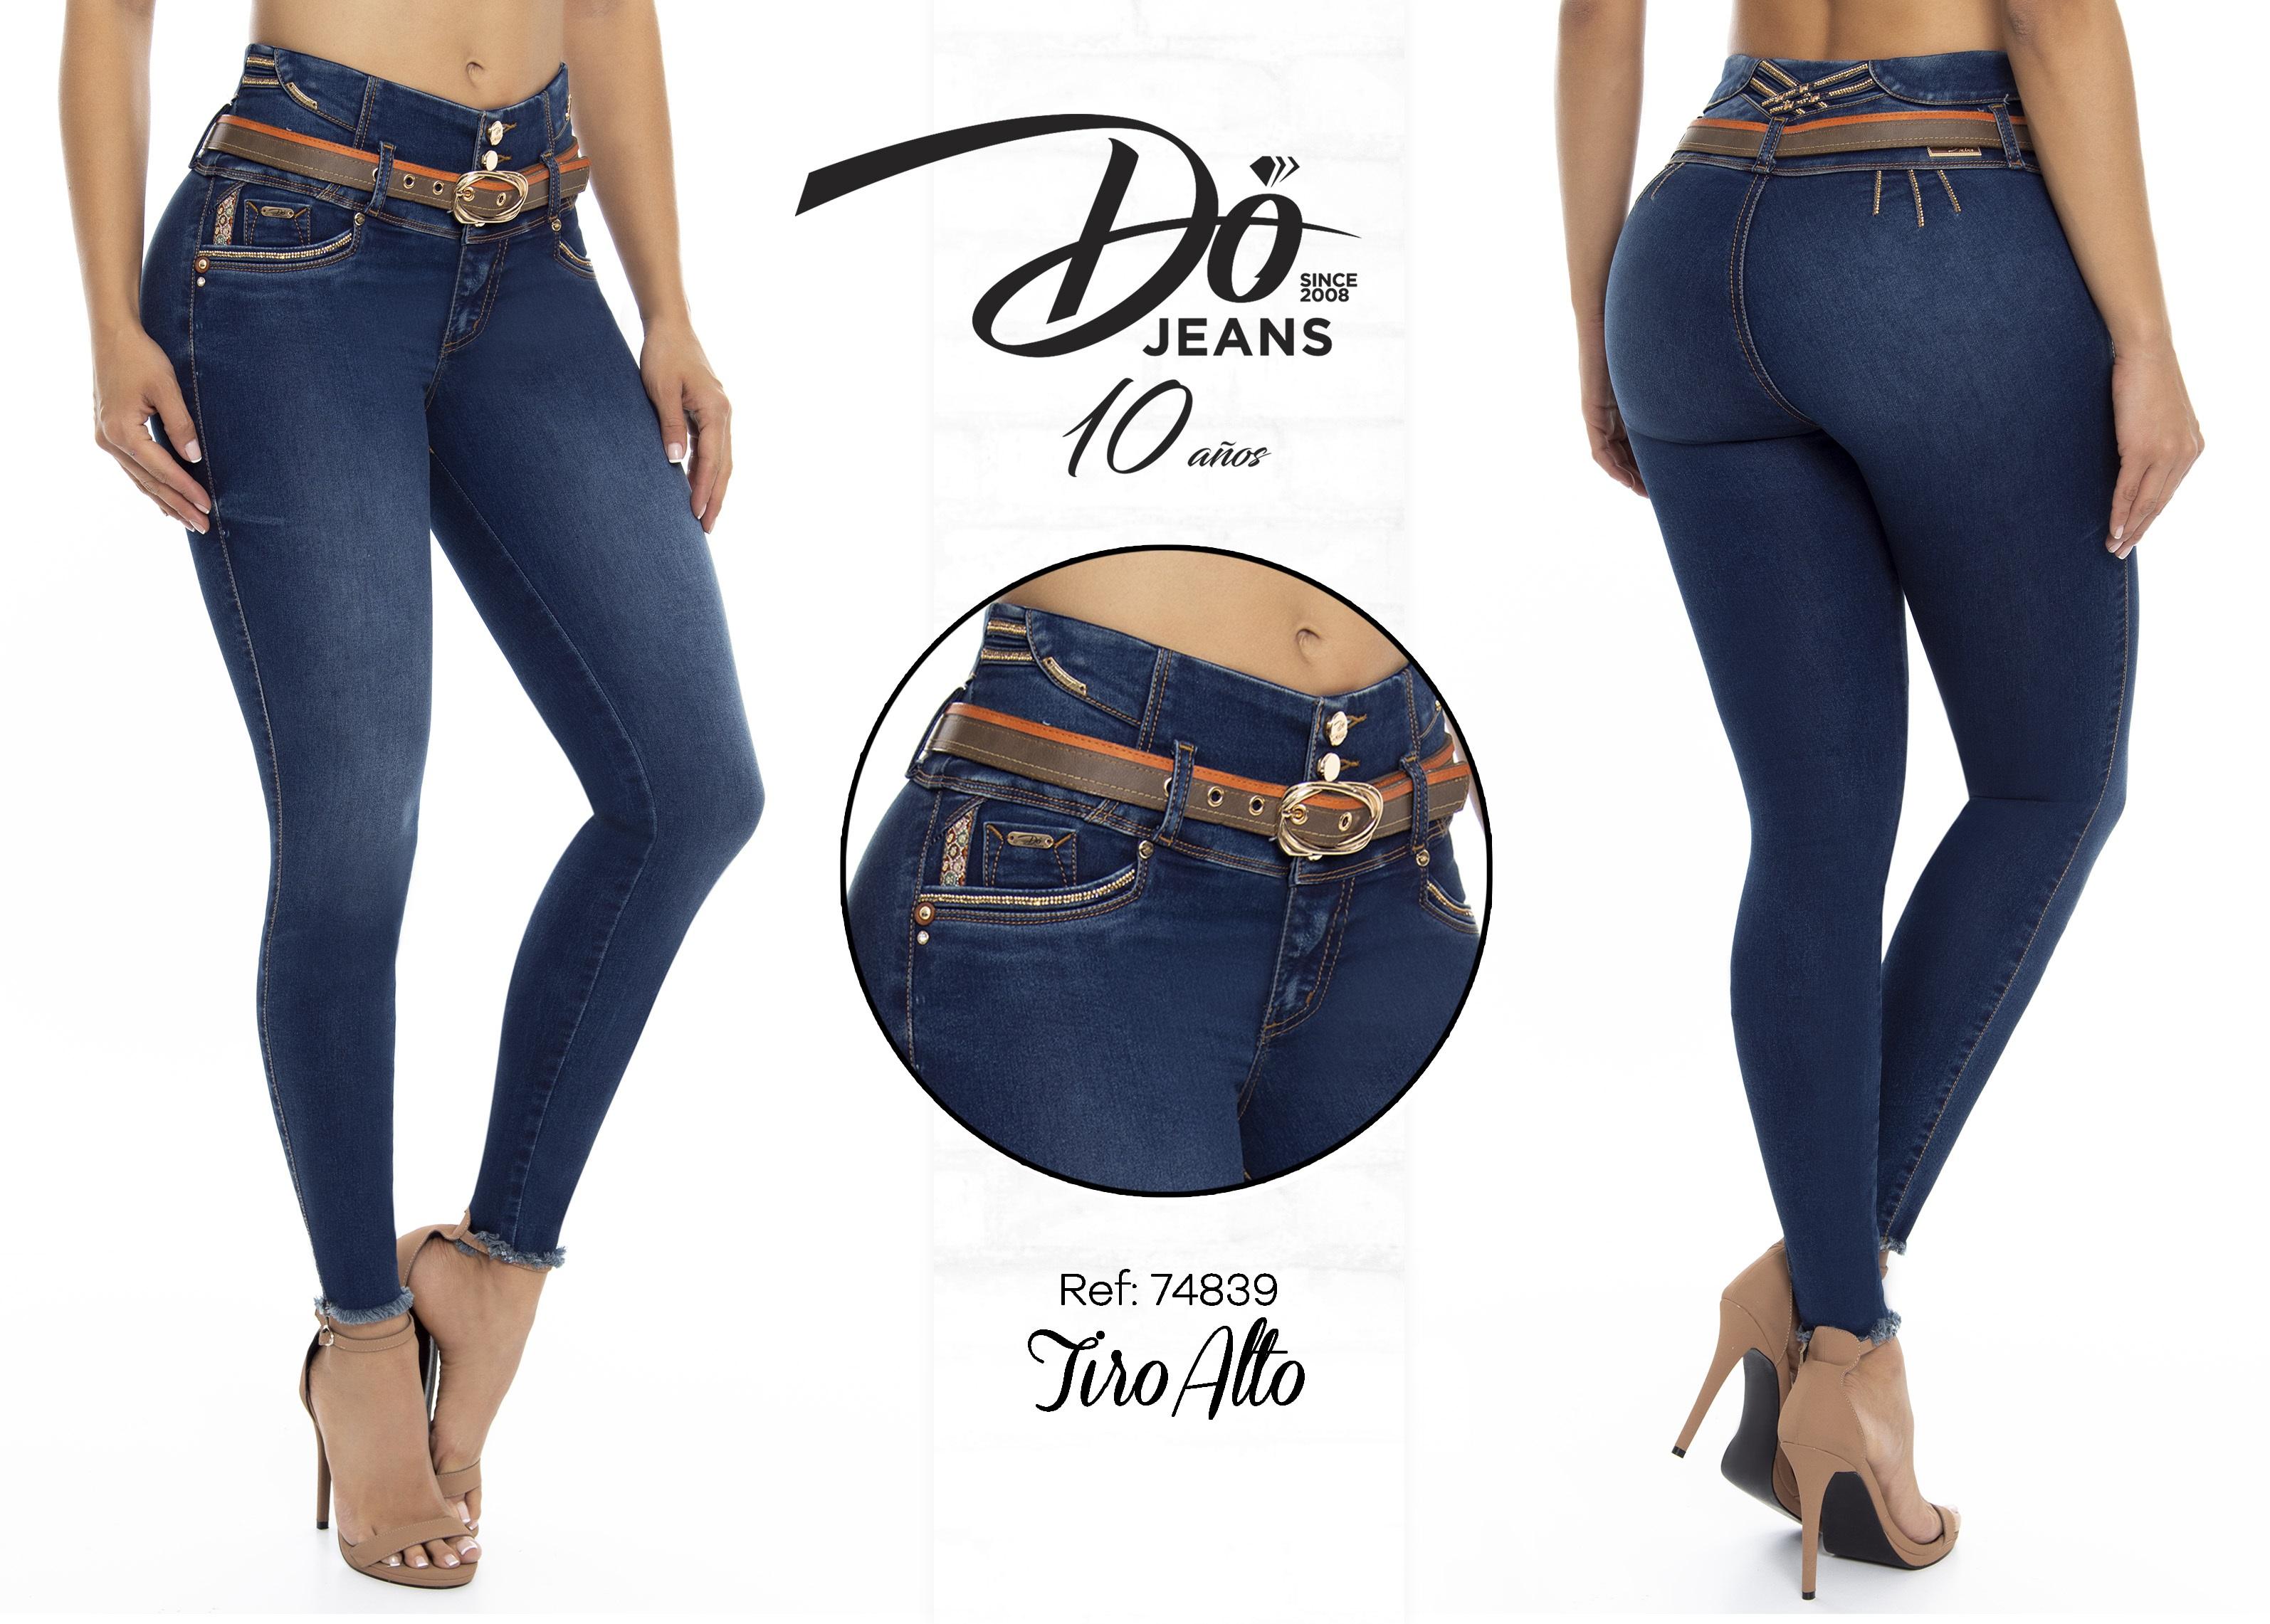 Jeans Levantacola Colombiano - Ref. 248 -74839 D